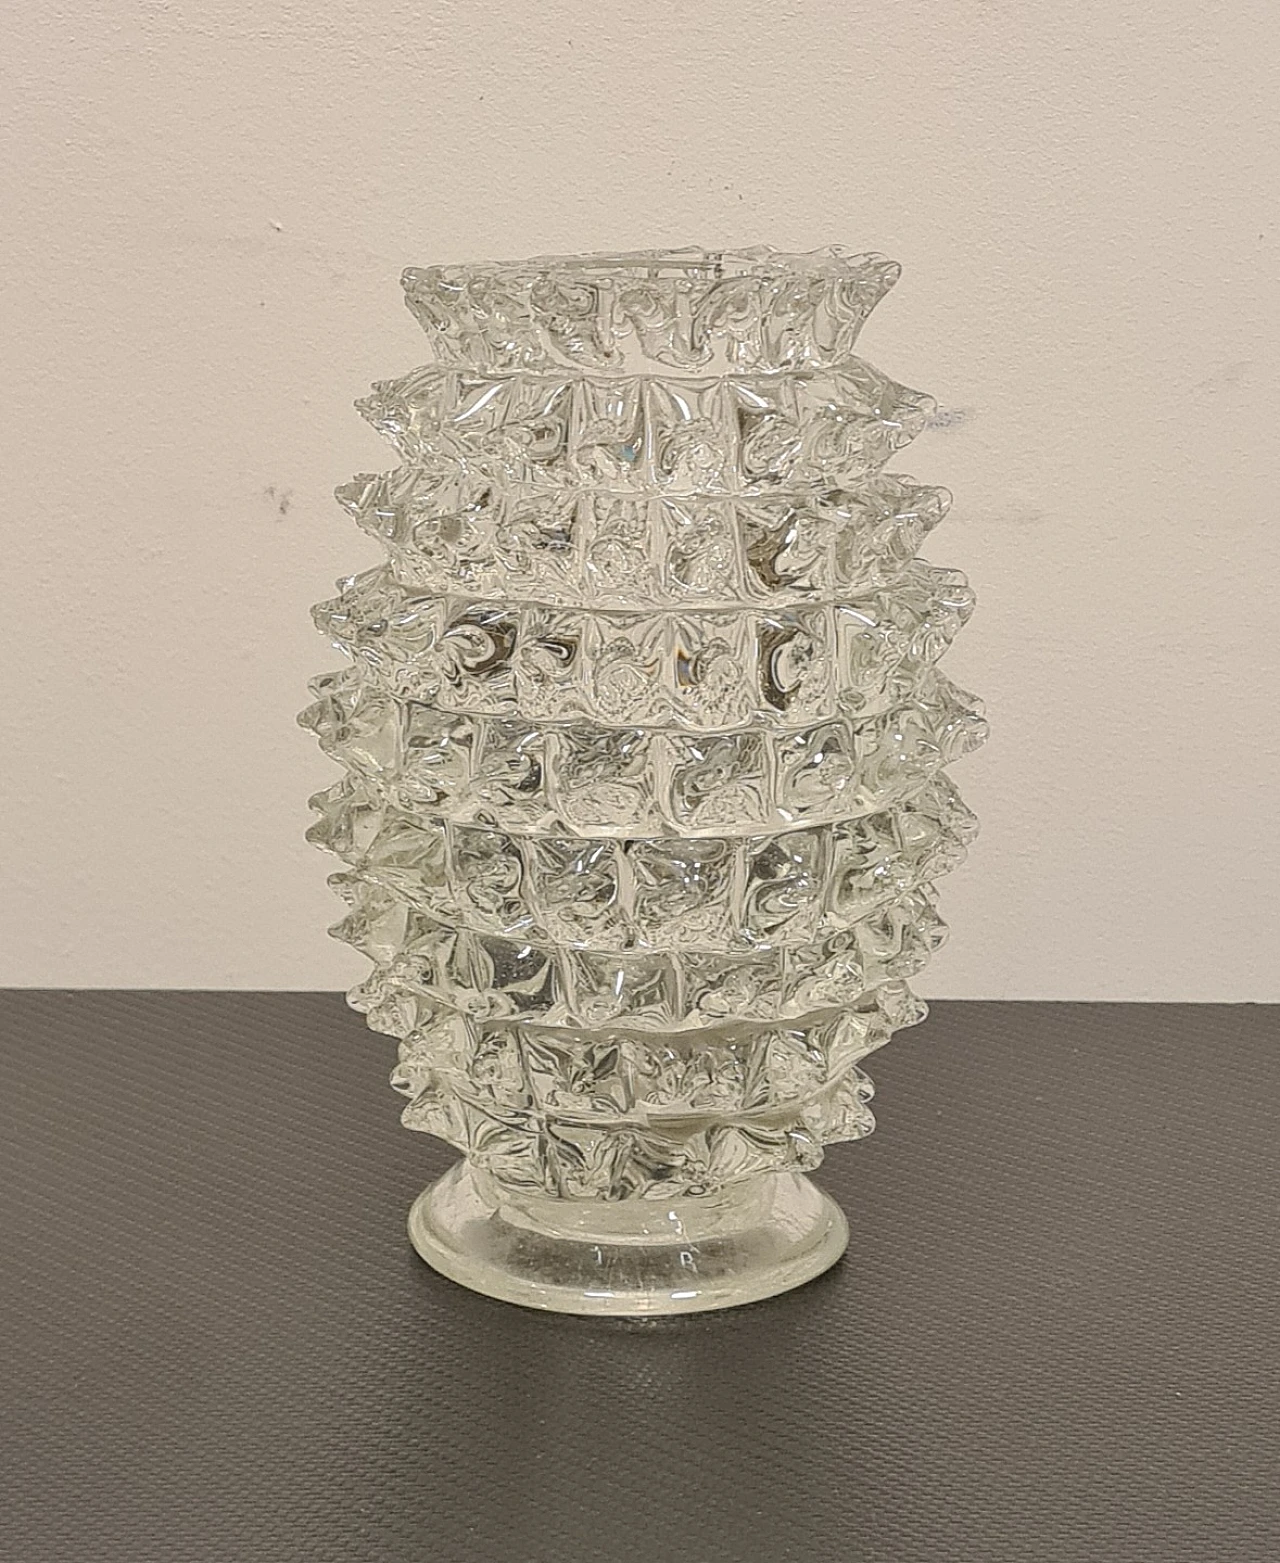 Rostered Murano glass vase by Barovier and Toso, 1940s 1